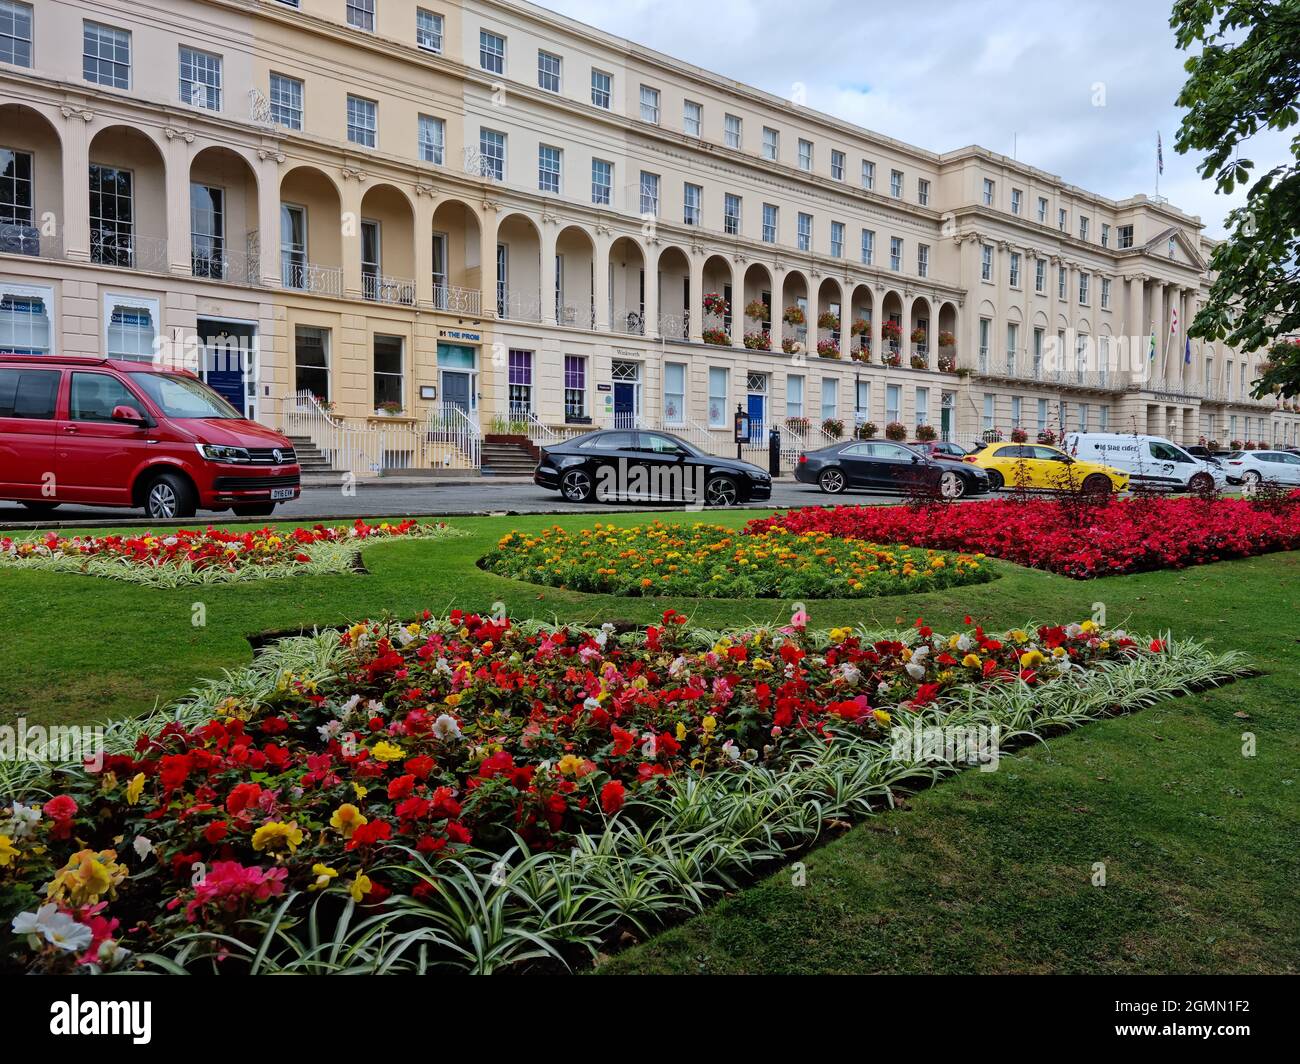 Cheltenham, September 2021: The Cheltenham Municipal Offices are a municipal facility on The Promenade and an example of Regency architecture Stock Photo